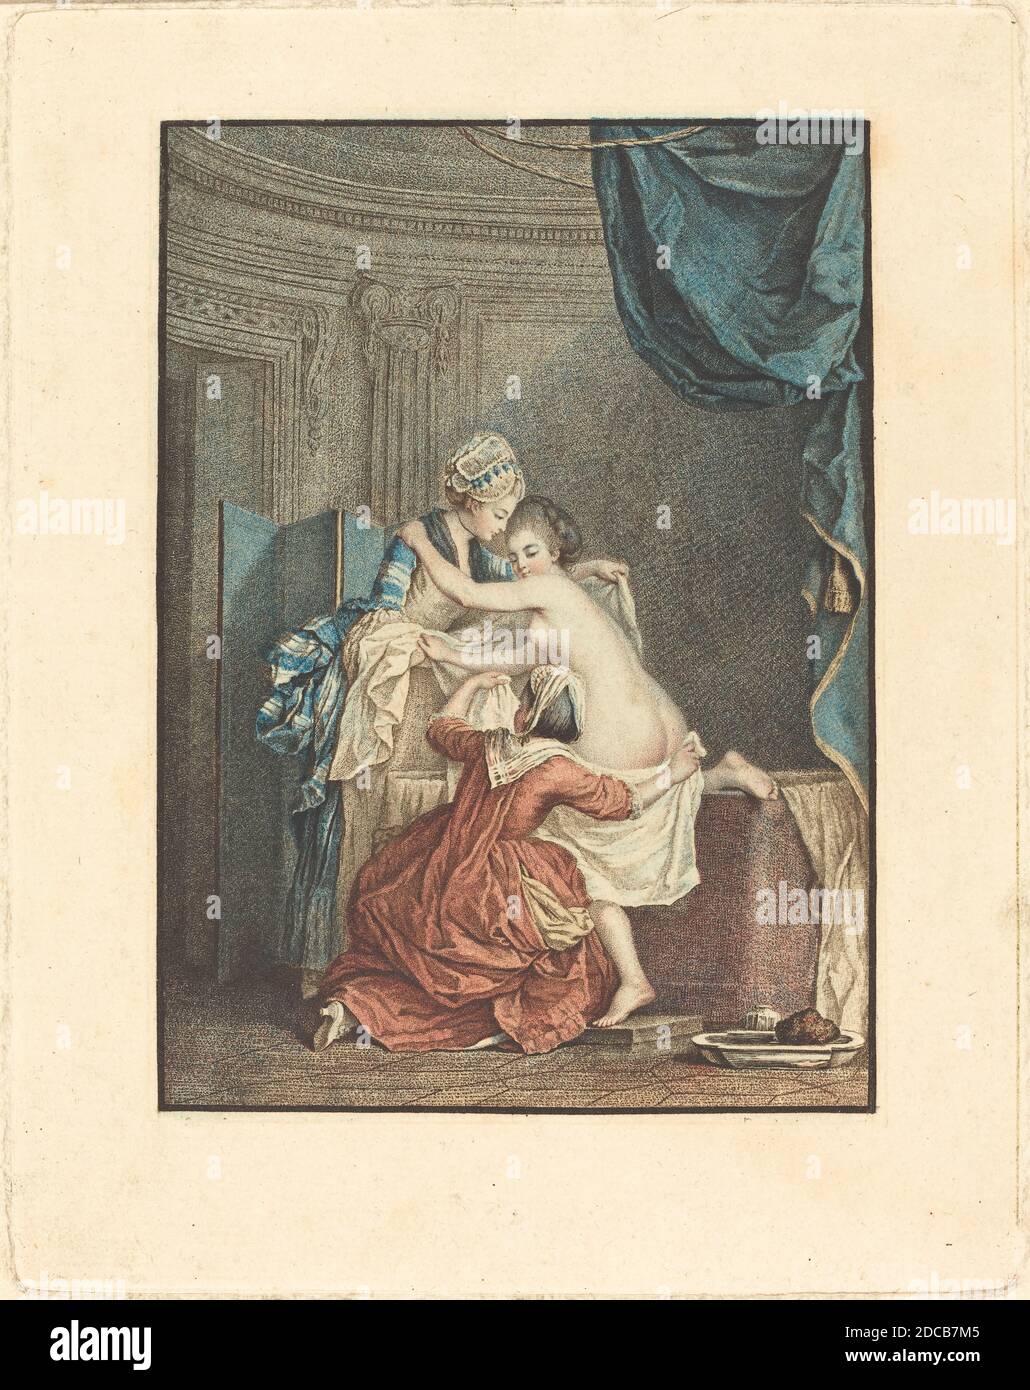 Nicolas François Regnault, (artist), French, 1746 - 1810, Pierre-Antoine Baudouin, (artist after), French, 1723 - 1769, Le bain (The Bath), color stipple etching and etching Stock Photo